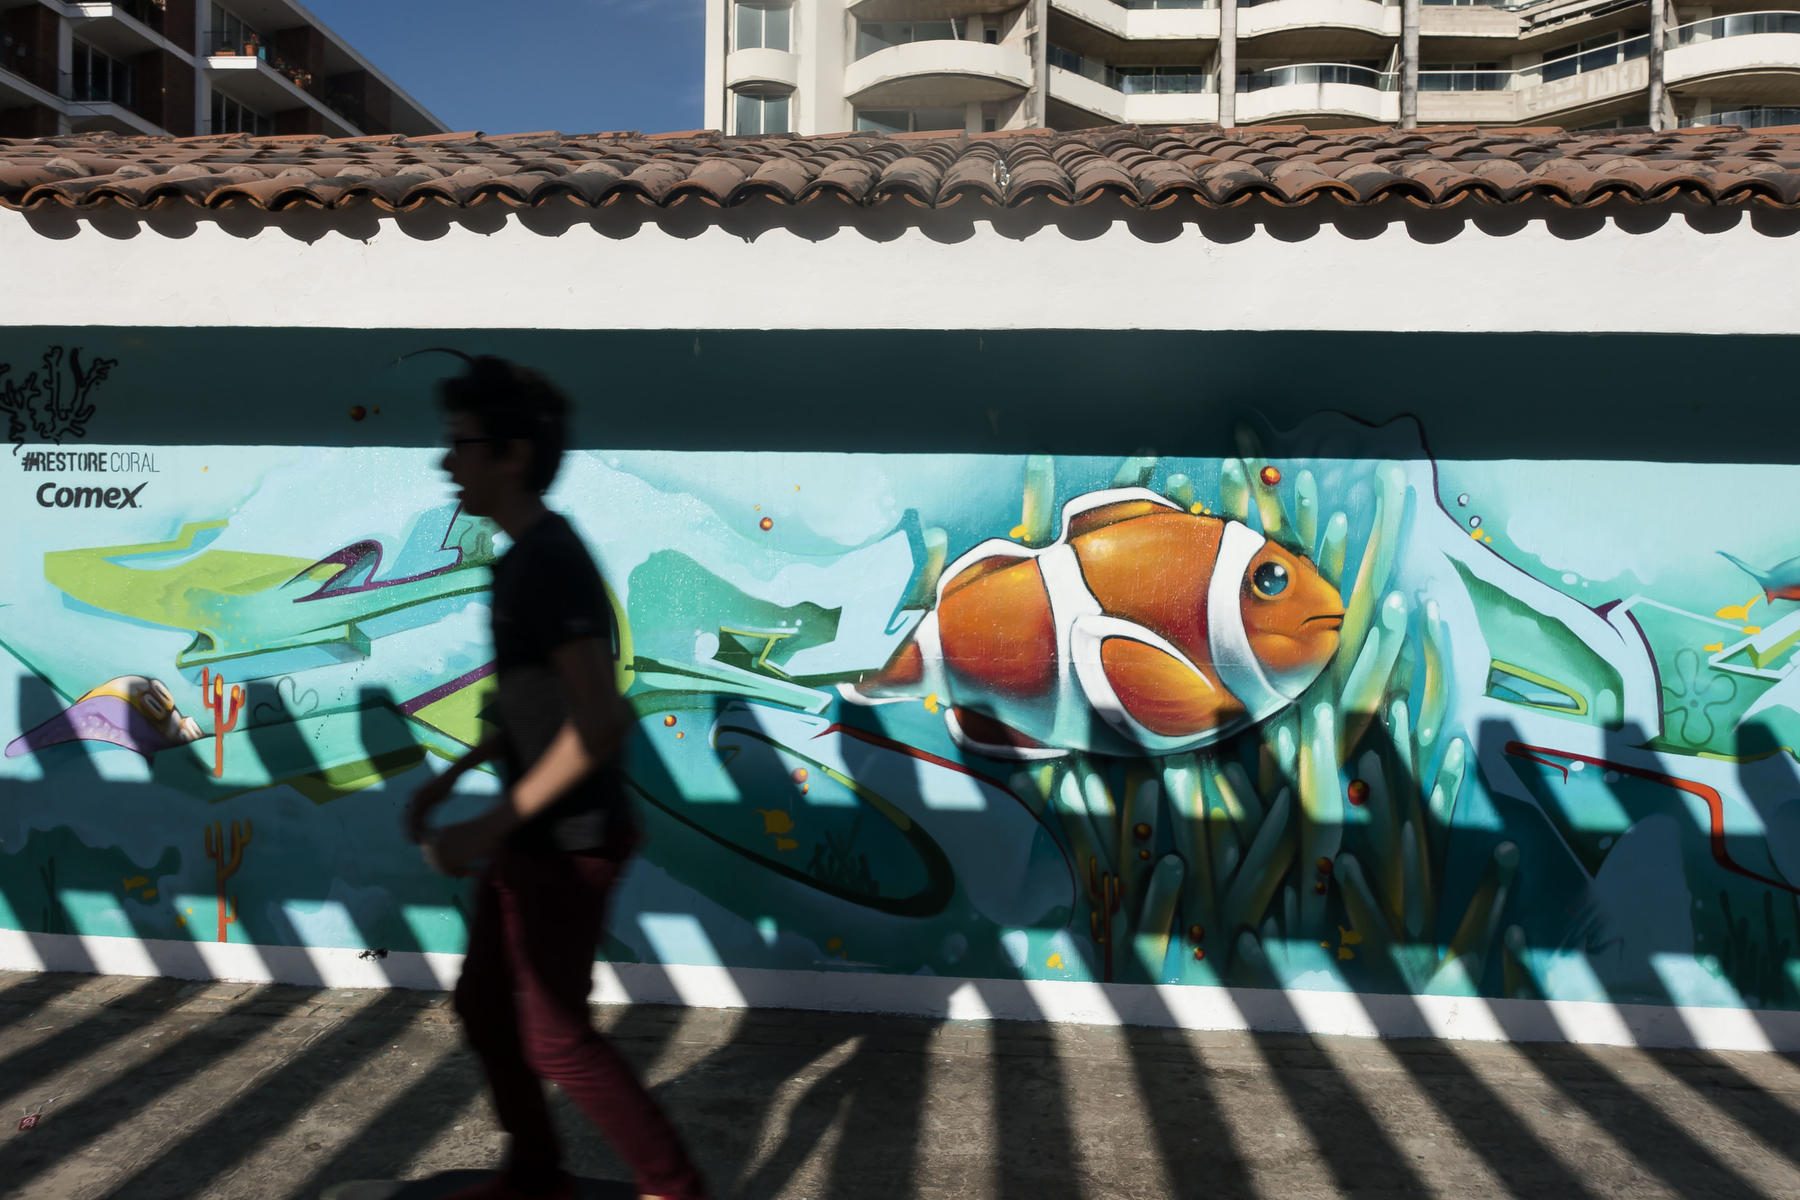 A skate boarder passes by the shadow of a fence on an underwater mural, painted as part of a Save the Reef project sponsored by a paint manufacturer : PUERTO VALLARTA - Wall Art & Bicycle Tour : Viviane Moos |  Documentary Photographer